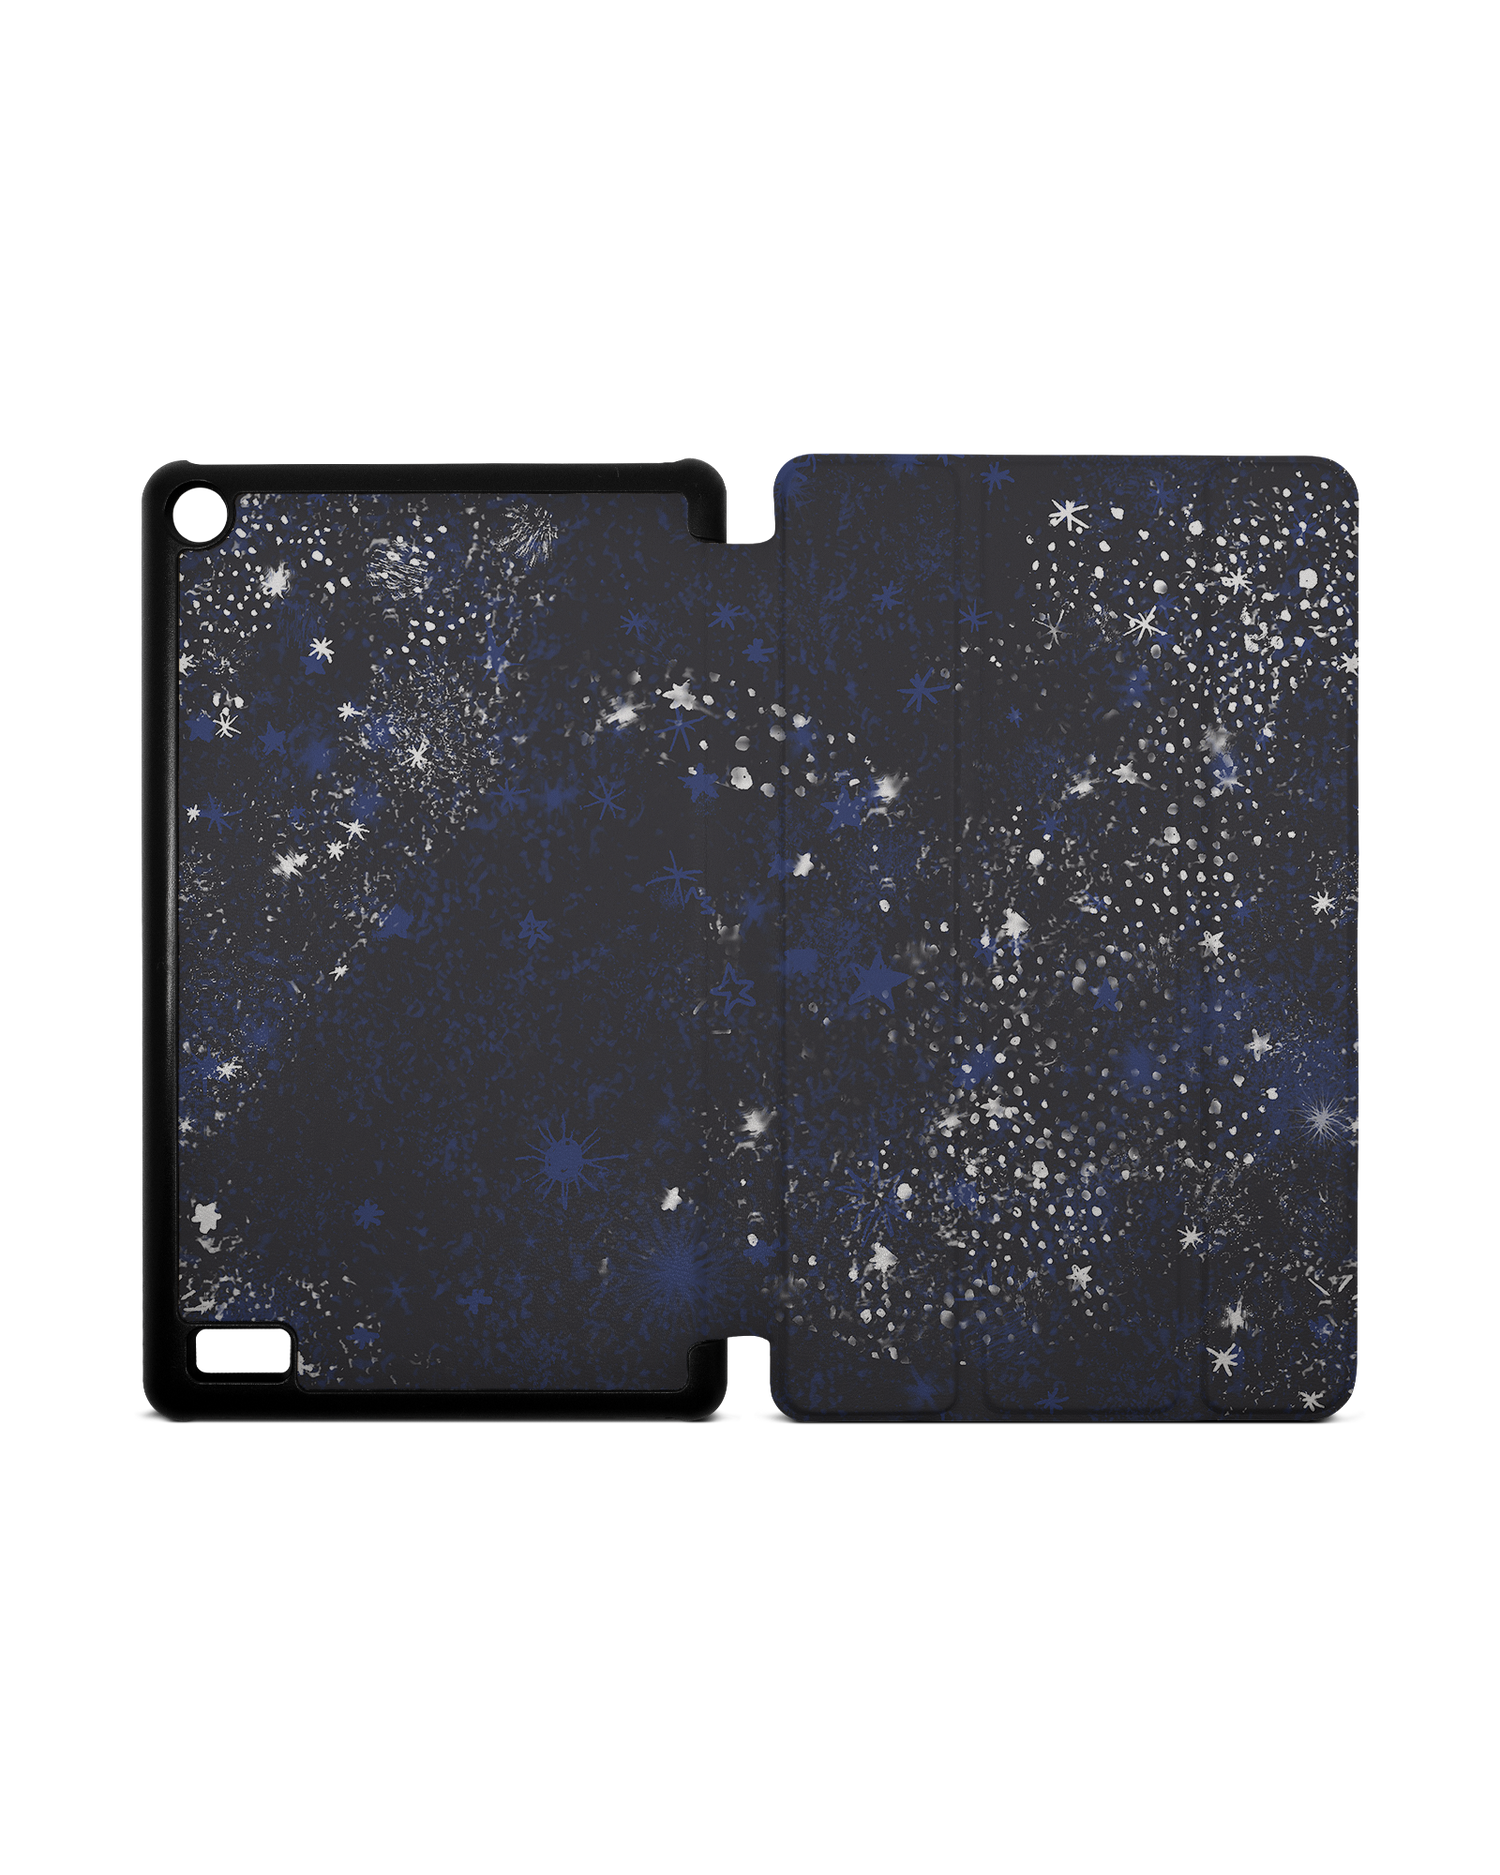 Starry Night Sky Tablet Smart Case for Amazon Fire 7: Opened